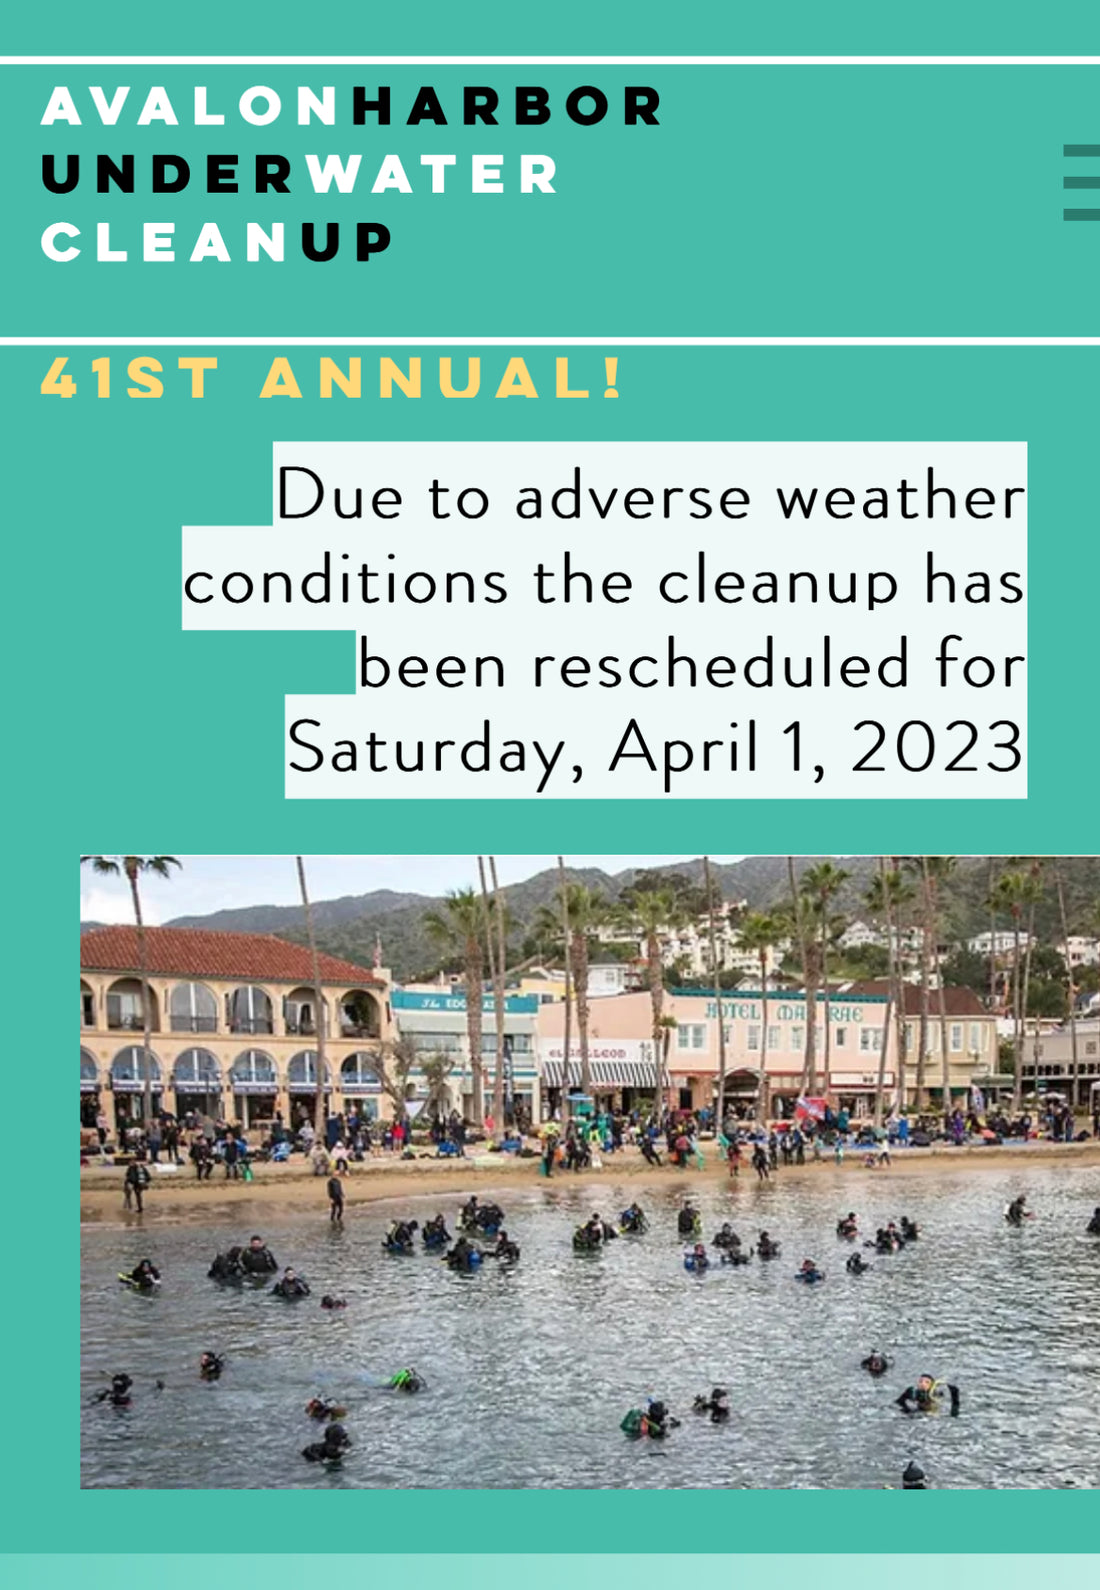 Urgent Avalon Harbor Cleanup is Cancelled for this weekend